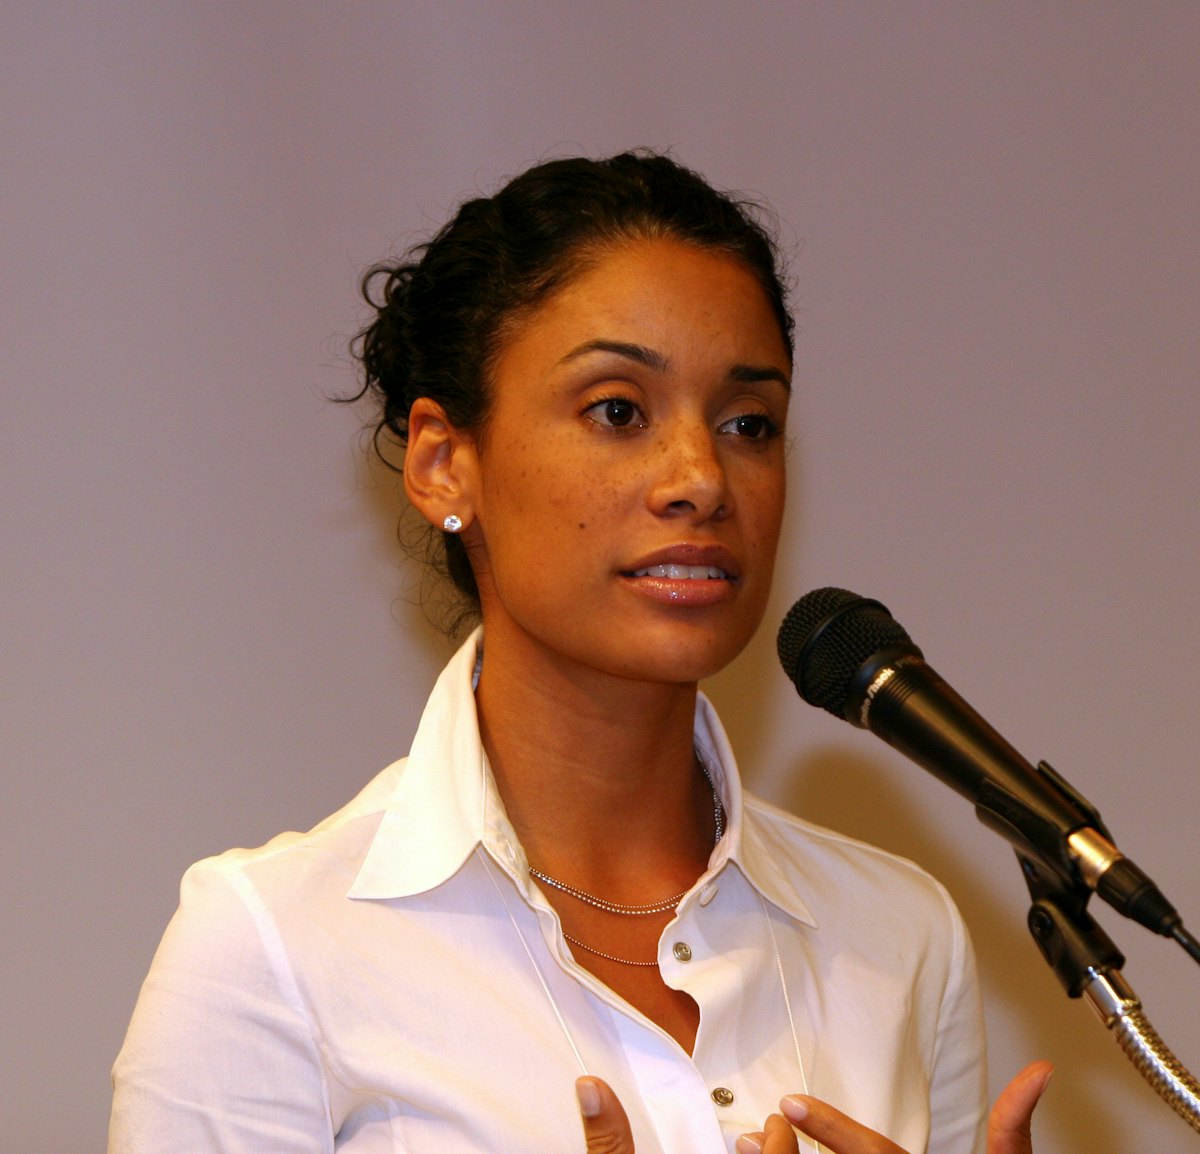 Camille Henderson gives a presentation on "Achieving Racial Unity: Walking the Spiritual Path with Practical Feet." Her talk was one of several at a breakout session on Race Unity and Intercultural Issues at the 30th annual Association for Baha'i Studies conference on 11 August 2006. (Photo by Courosh Mehanian)